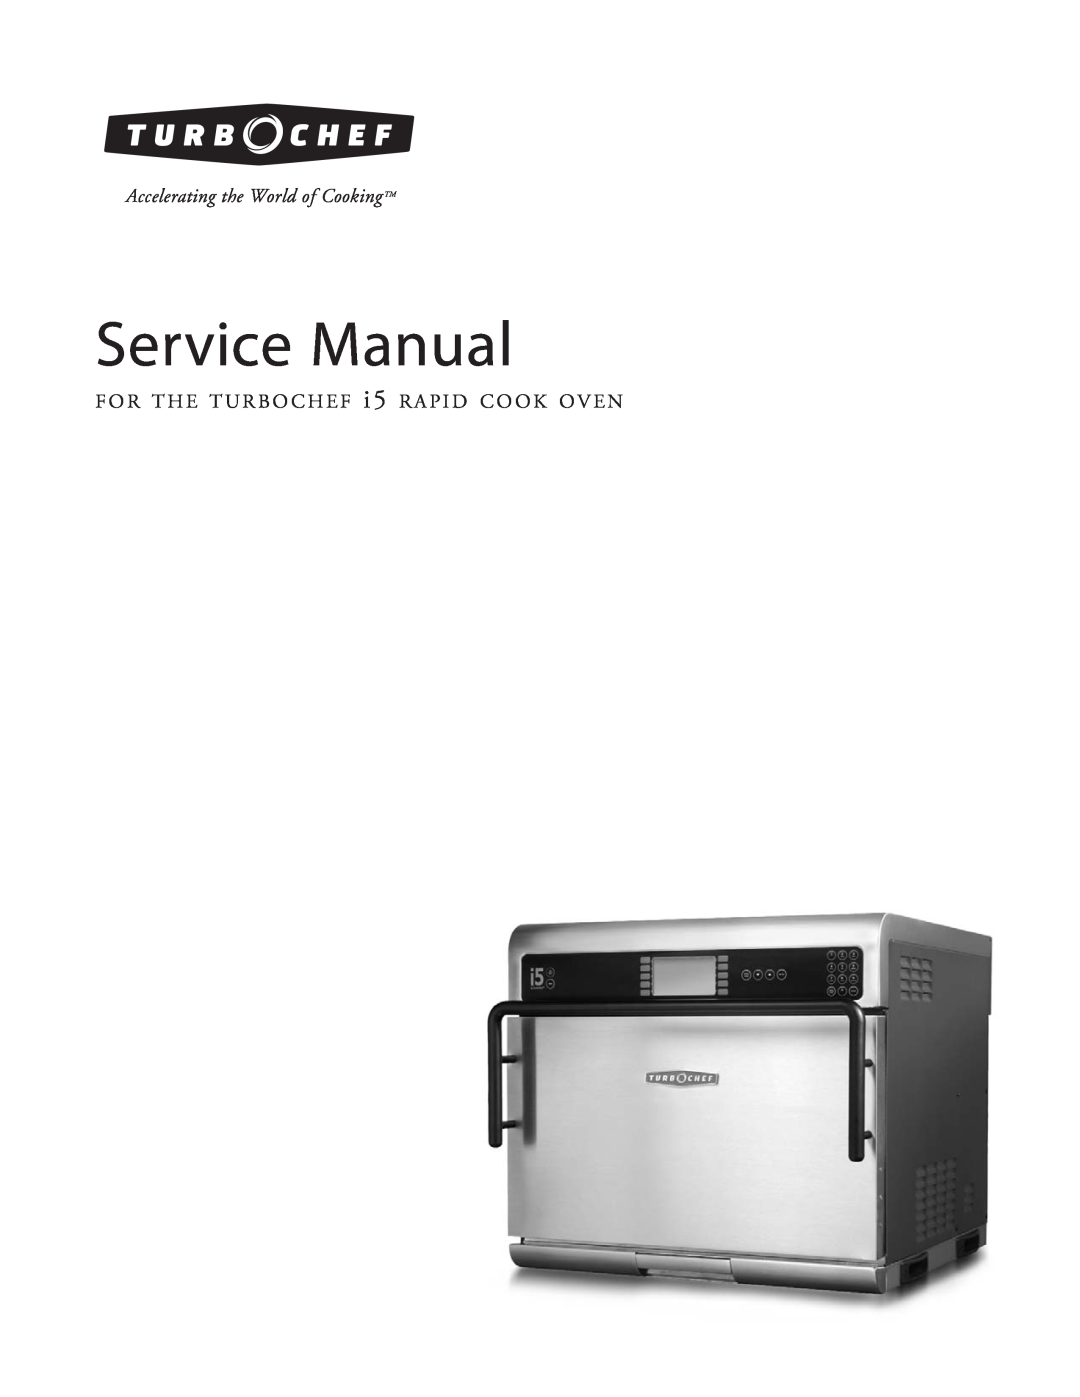 Turbo Chef Technologies i5 service manual Accelerating the World of Cooking TM 